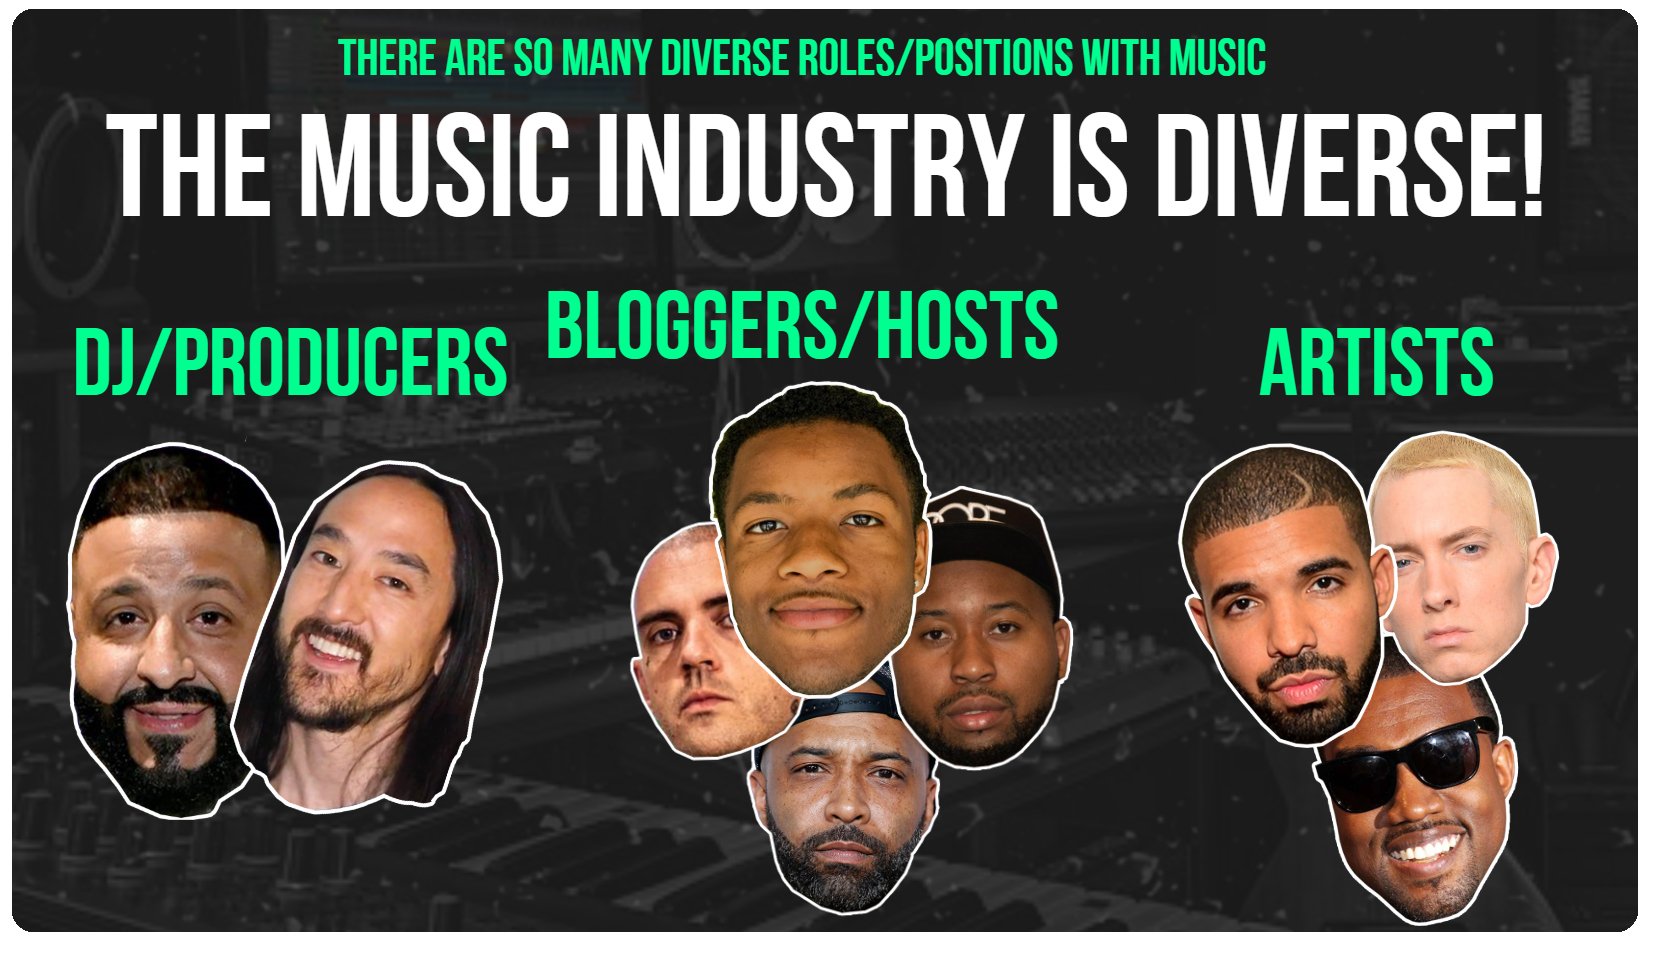 Music Industry's Diversity for Music Networking